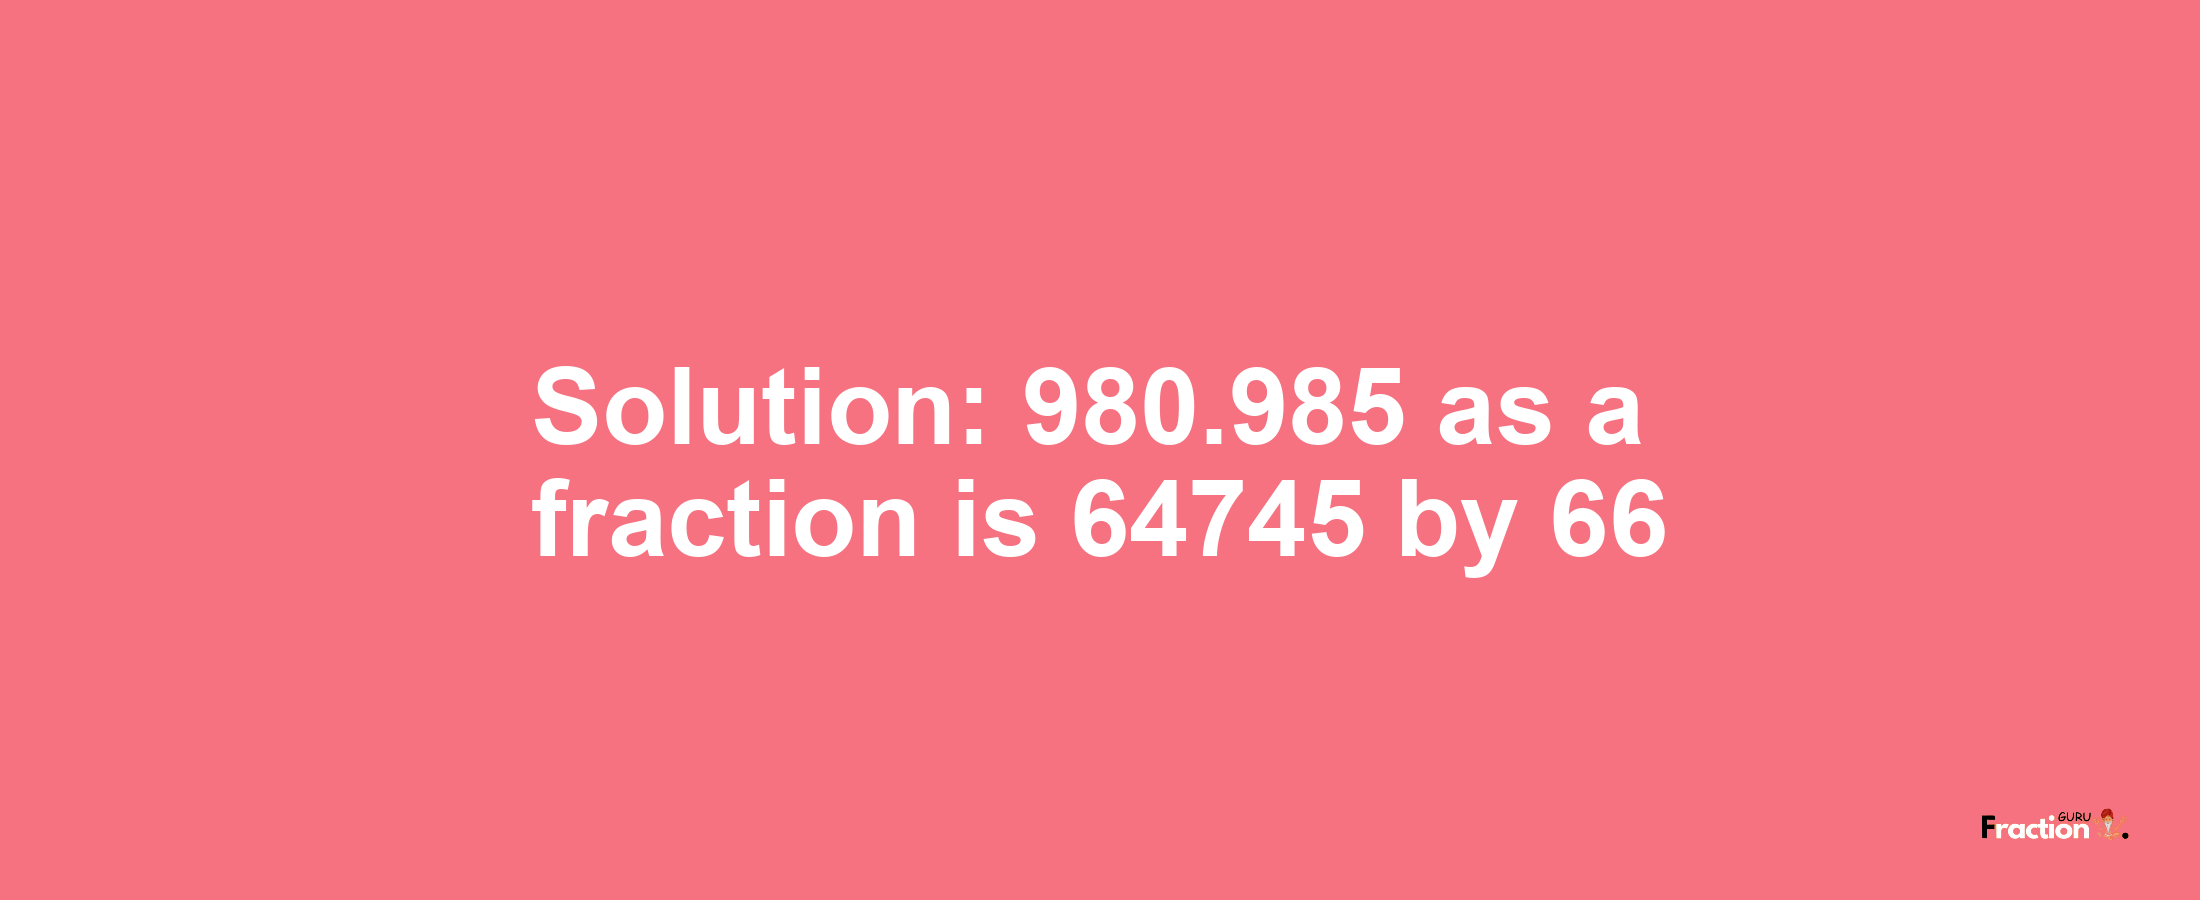 Solution:980.985 as a fraction is 64745/66